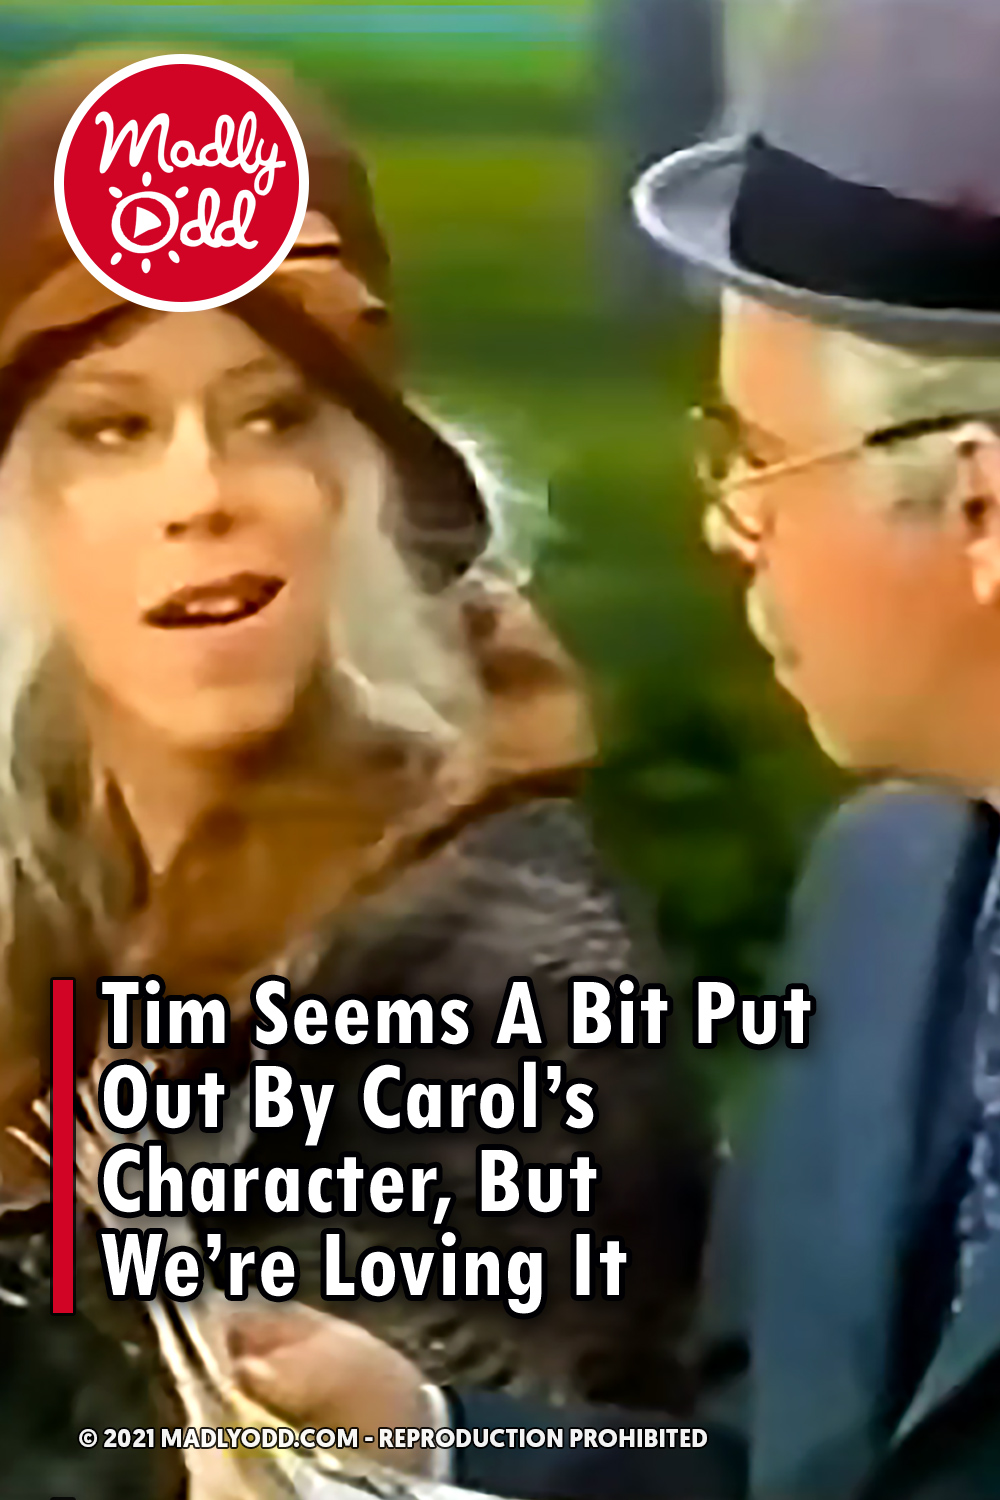 Tim Seems A Bit Put Out By Carol’s Character, But We’re Loving It